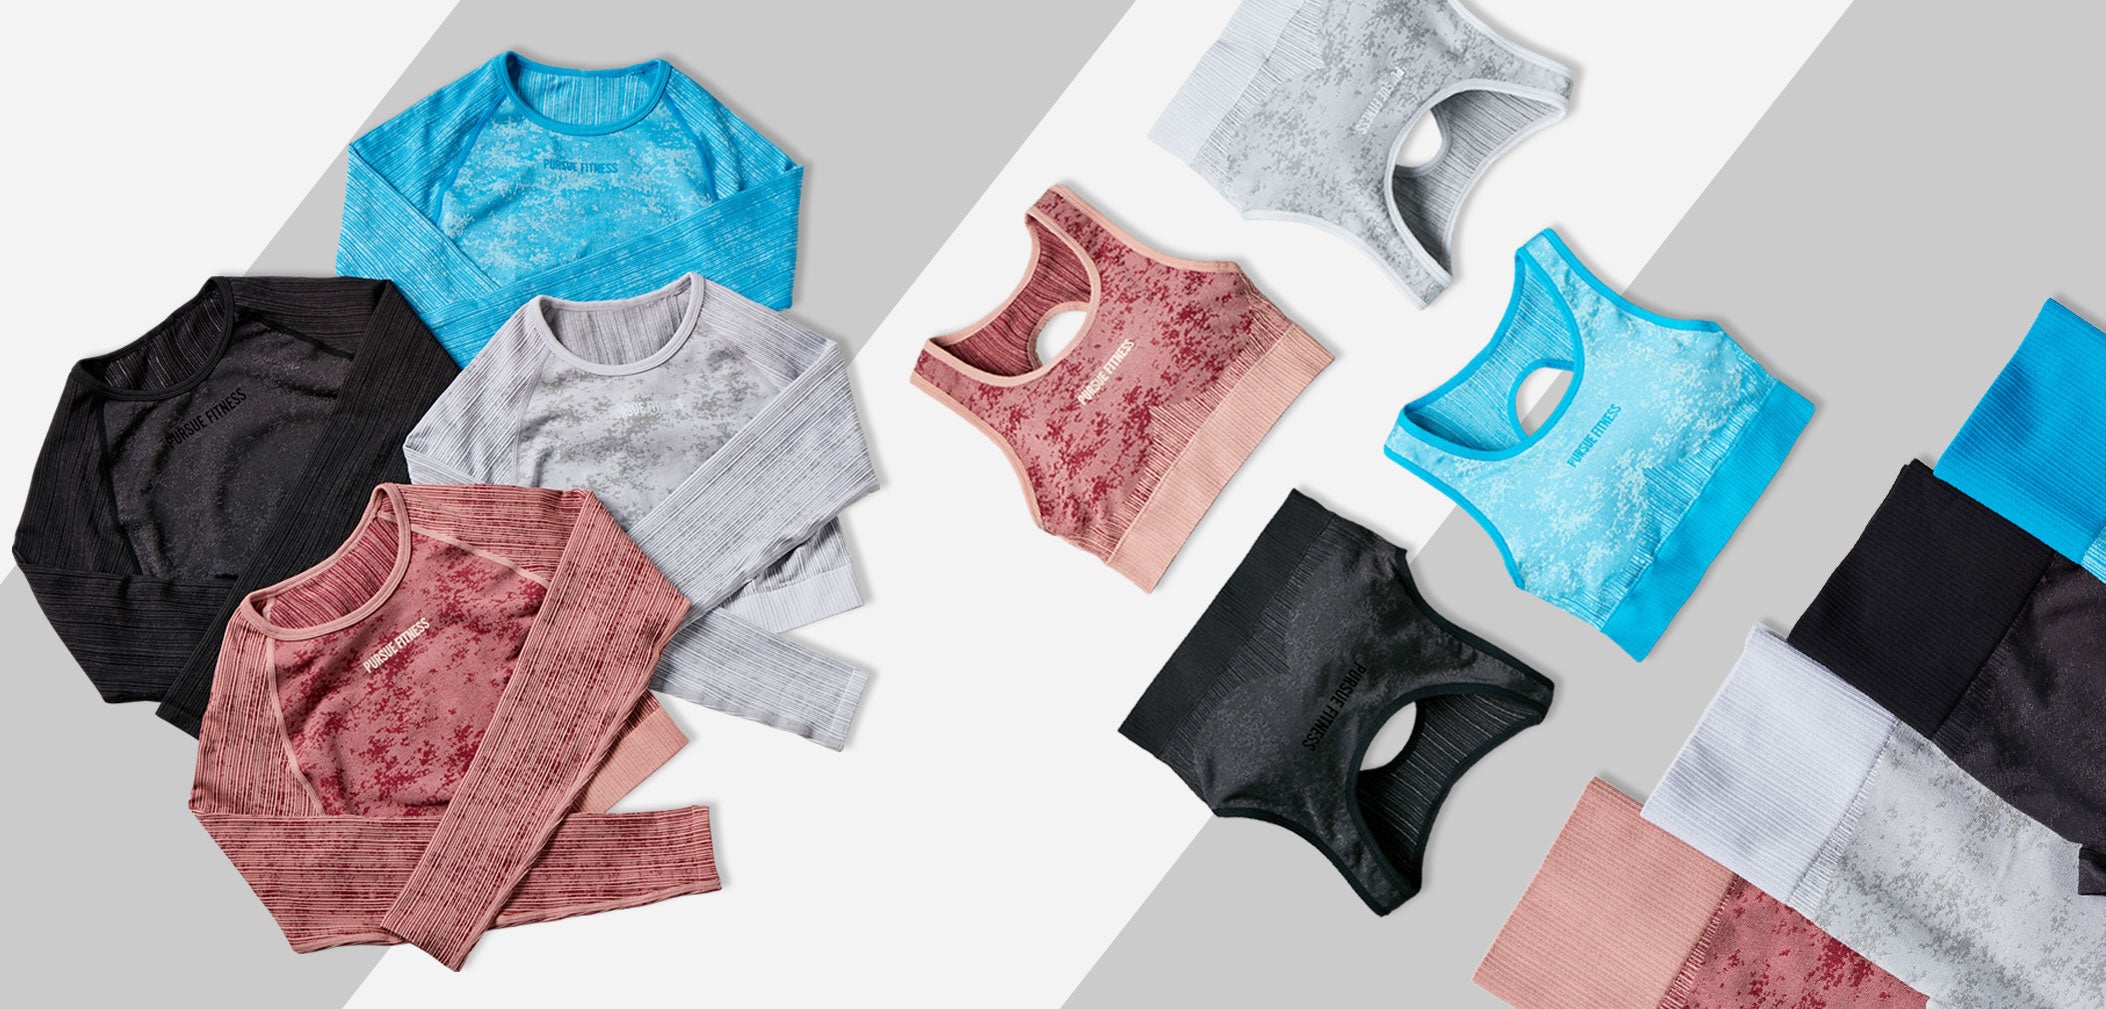 Ocean Seamless Gym Wear, Leggings, Crop Tops and Sports Bras - Pursue Fitness